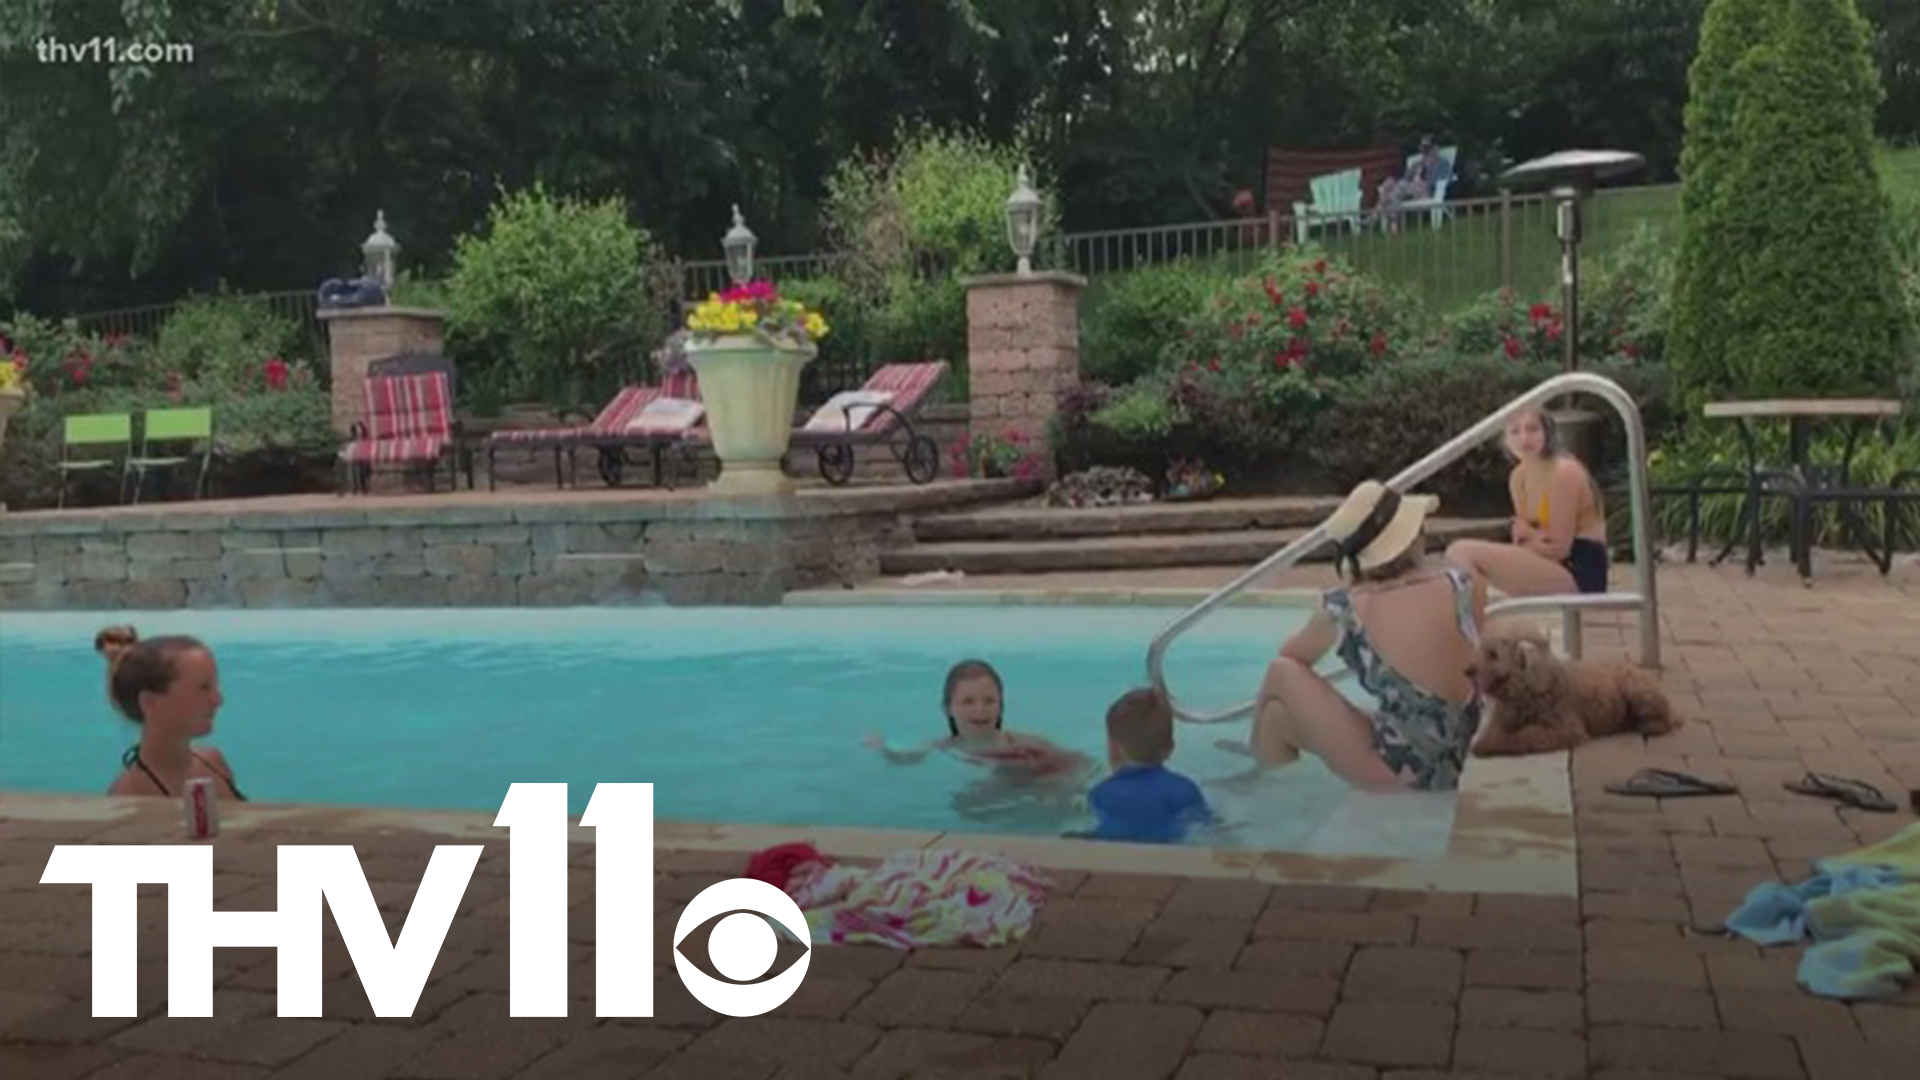 While the summer sun can bring a lot of fun, pool safety is top of mind this year. Every year there are reports of children drowning, even when surrounded by adults.